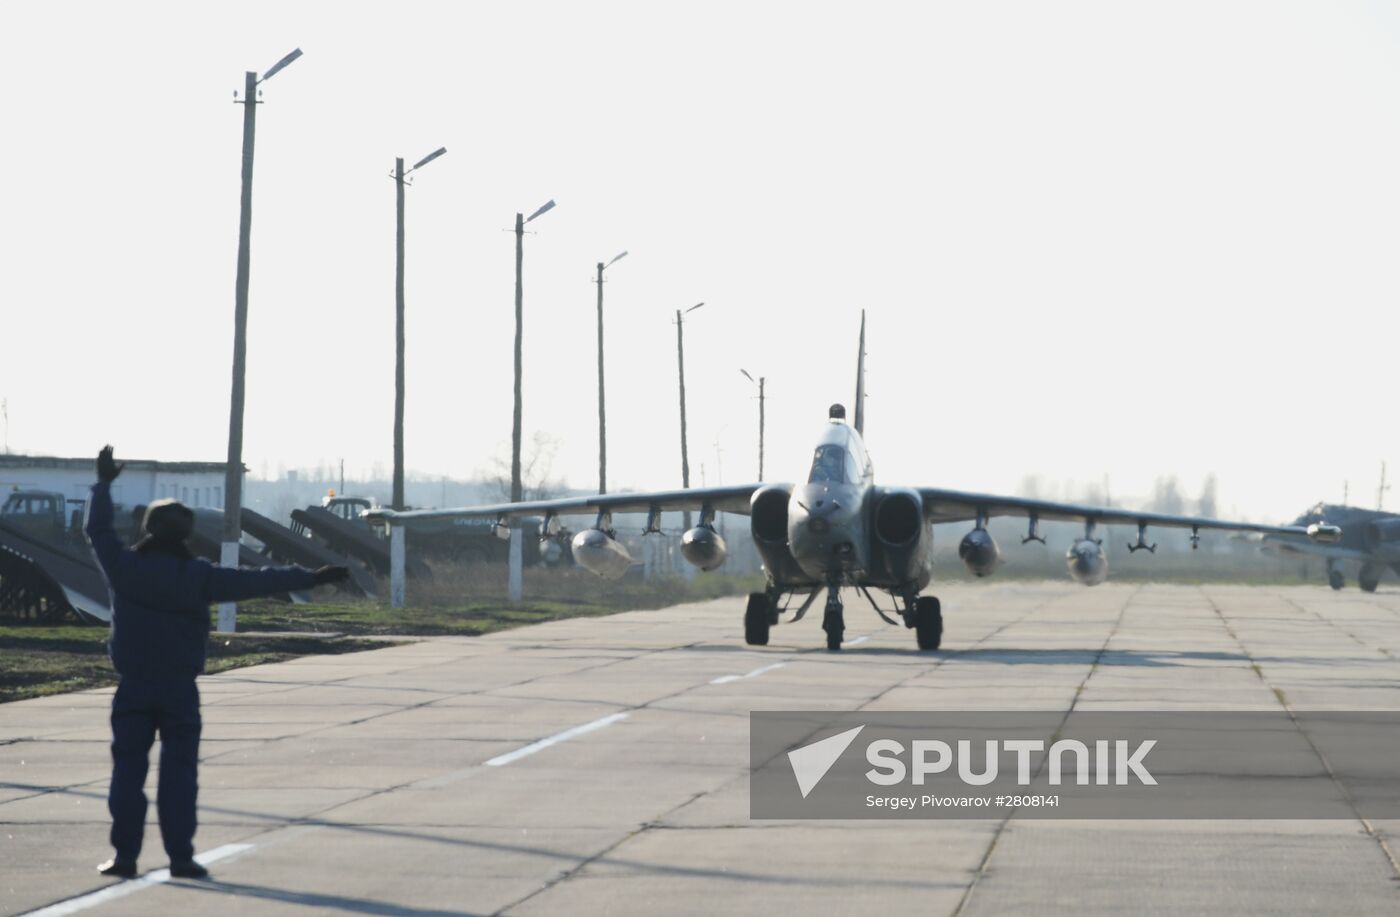 Crews of Russian aircraft welcomed home in Primorye-Akhtarsk from Khmeimim Air Base